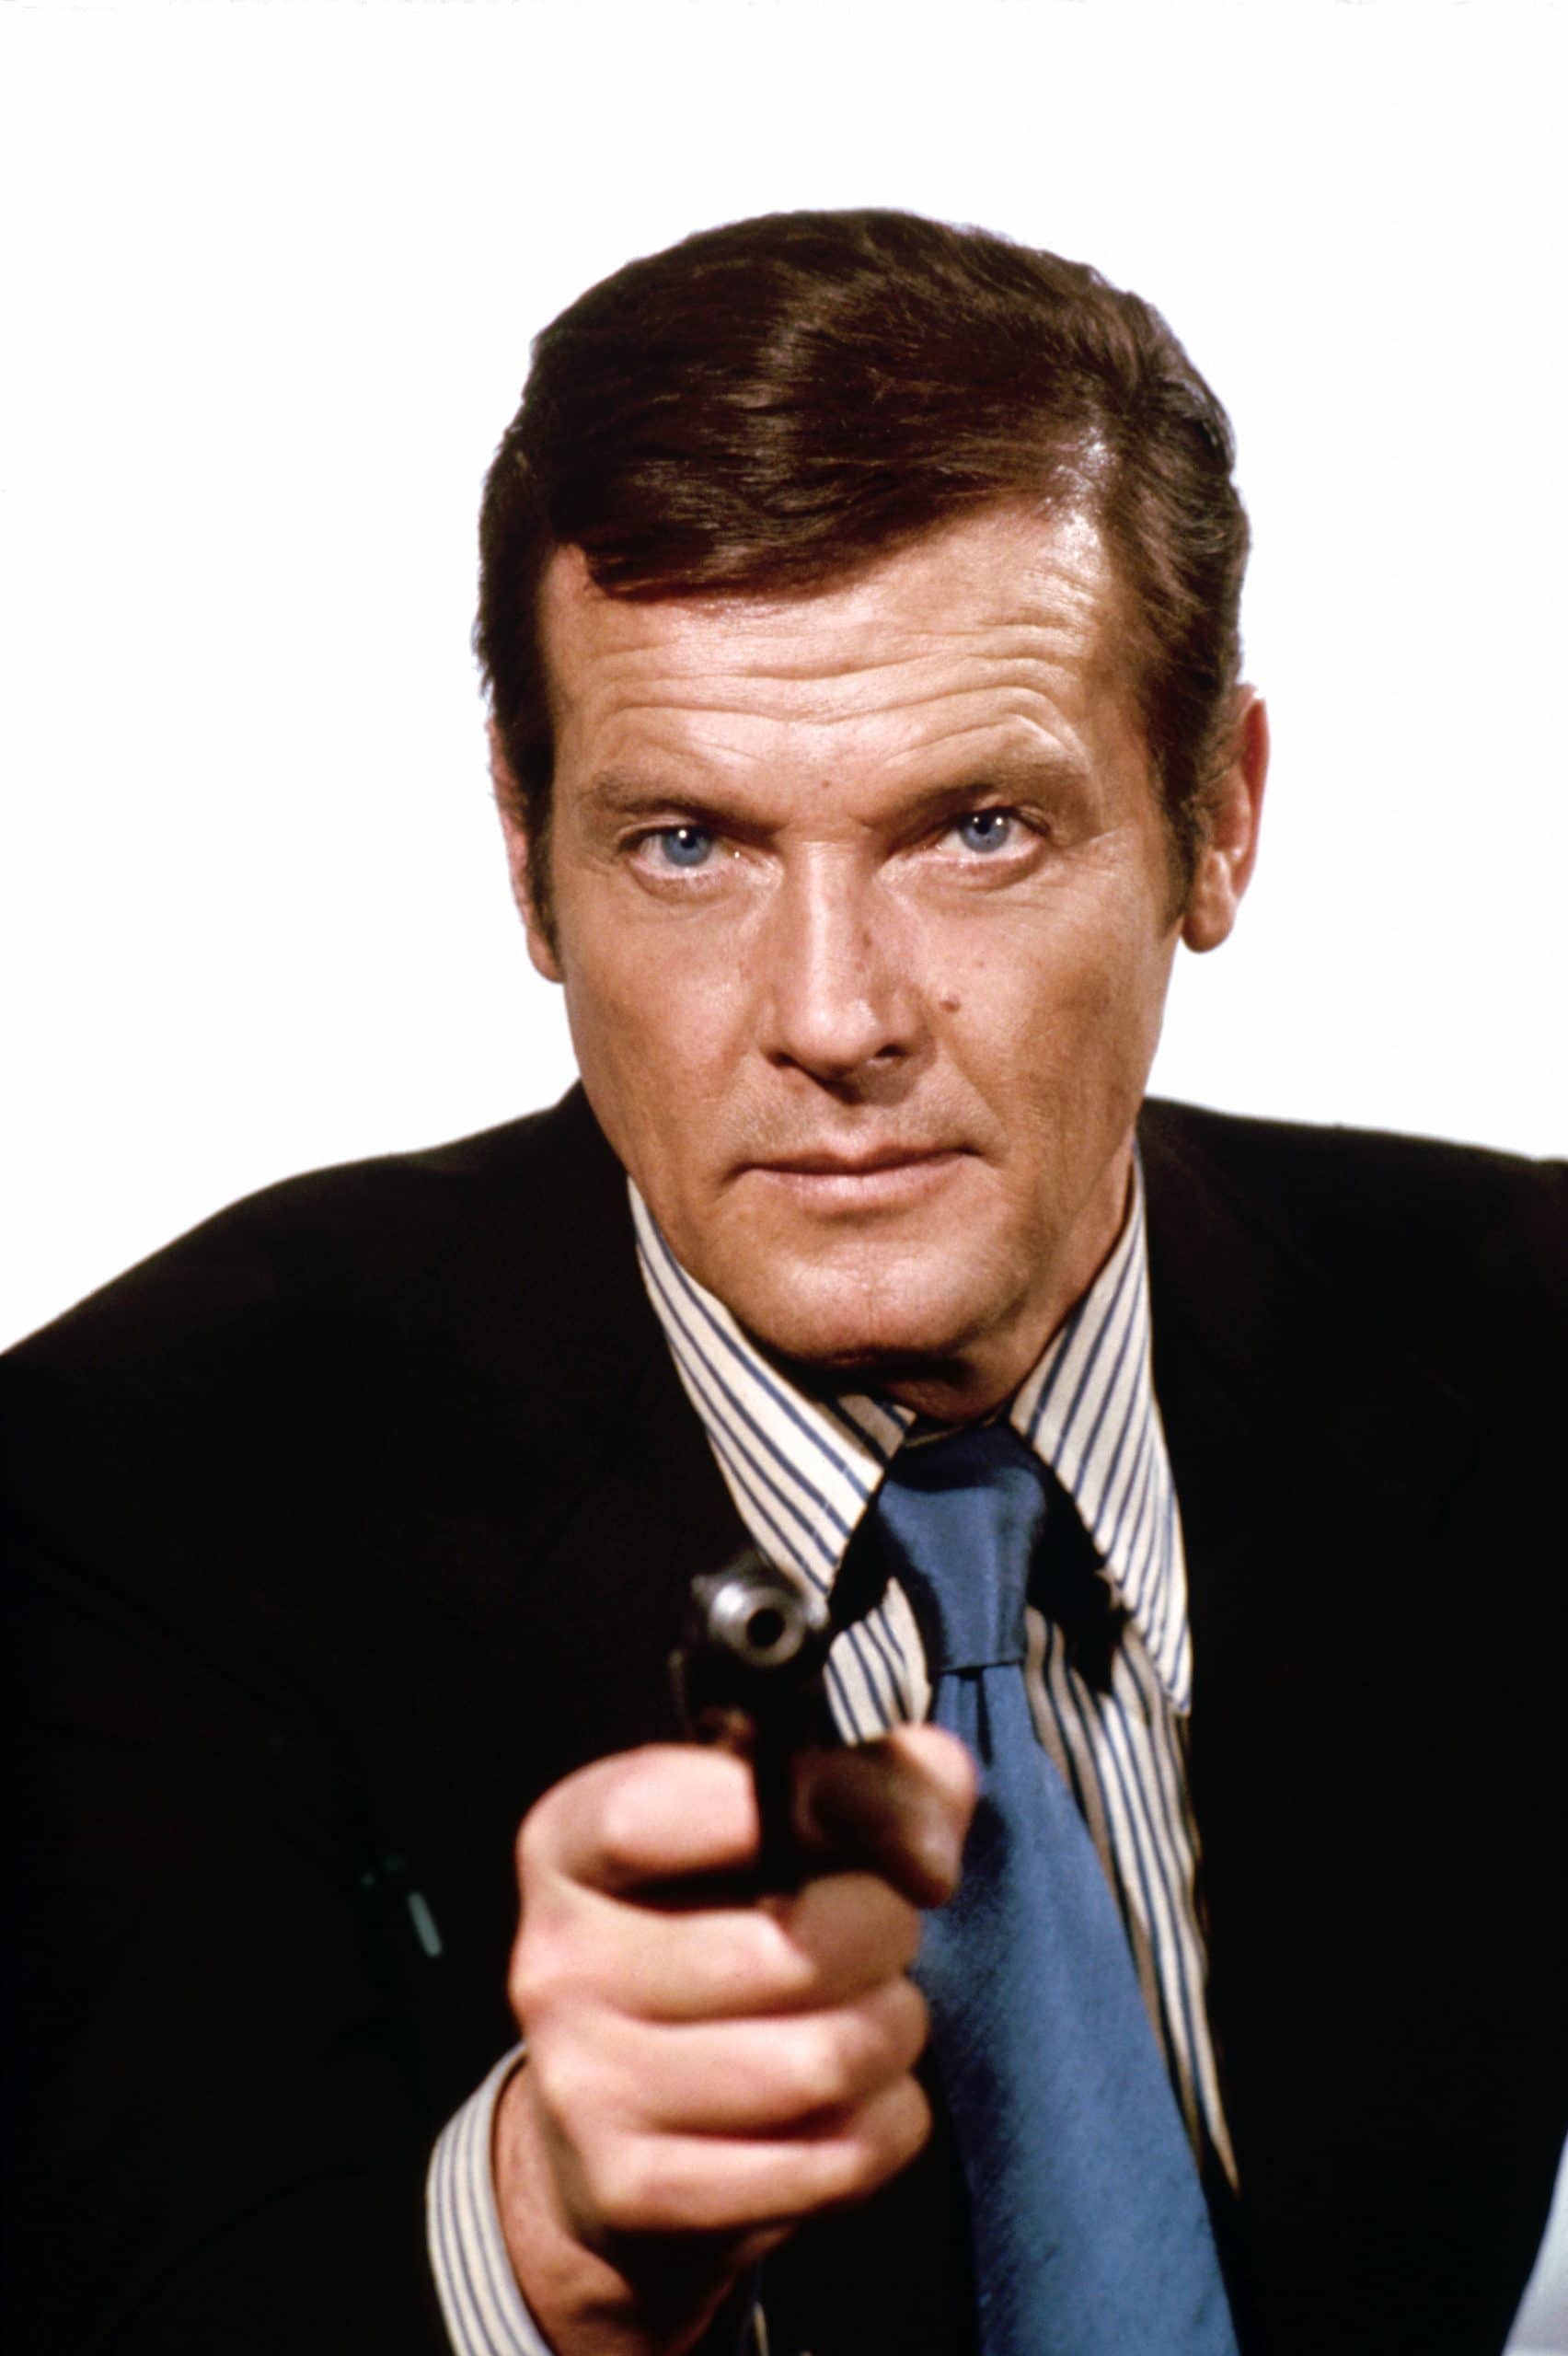 THE SPY WHO LOVED ME, Roger Moore, 1977 james bond 